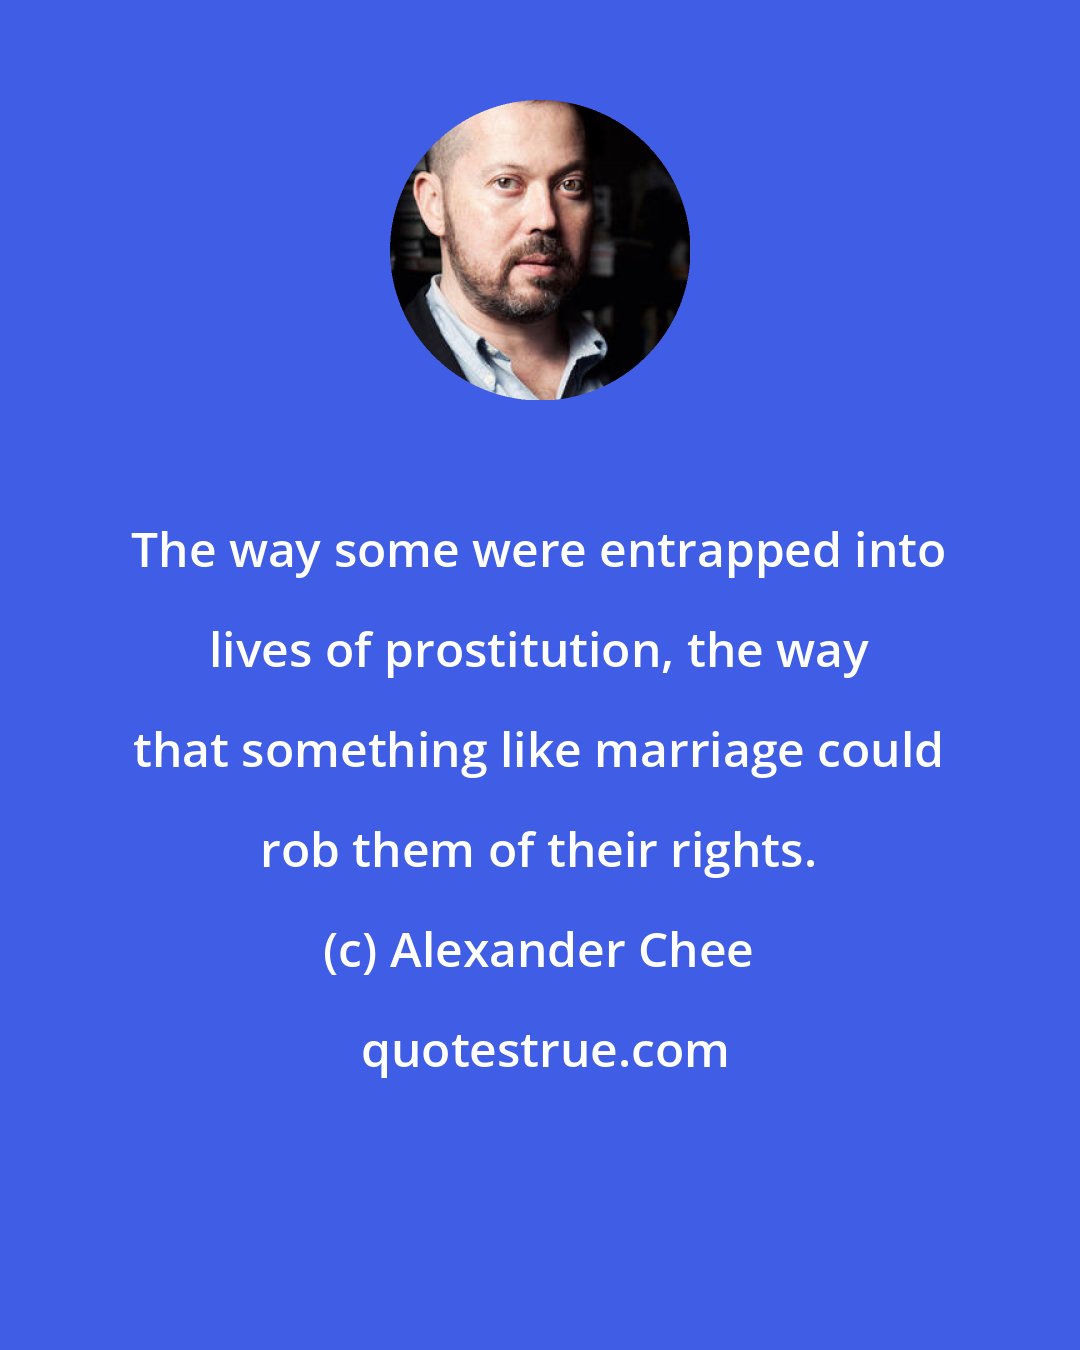 Alexander Chee: The way some were entrapped into lives of prostitution, the way that something like marriage could rob them of their rights.